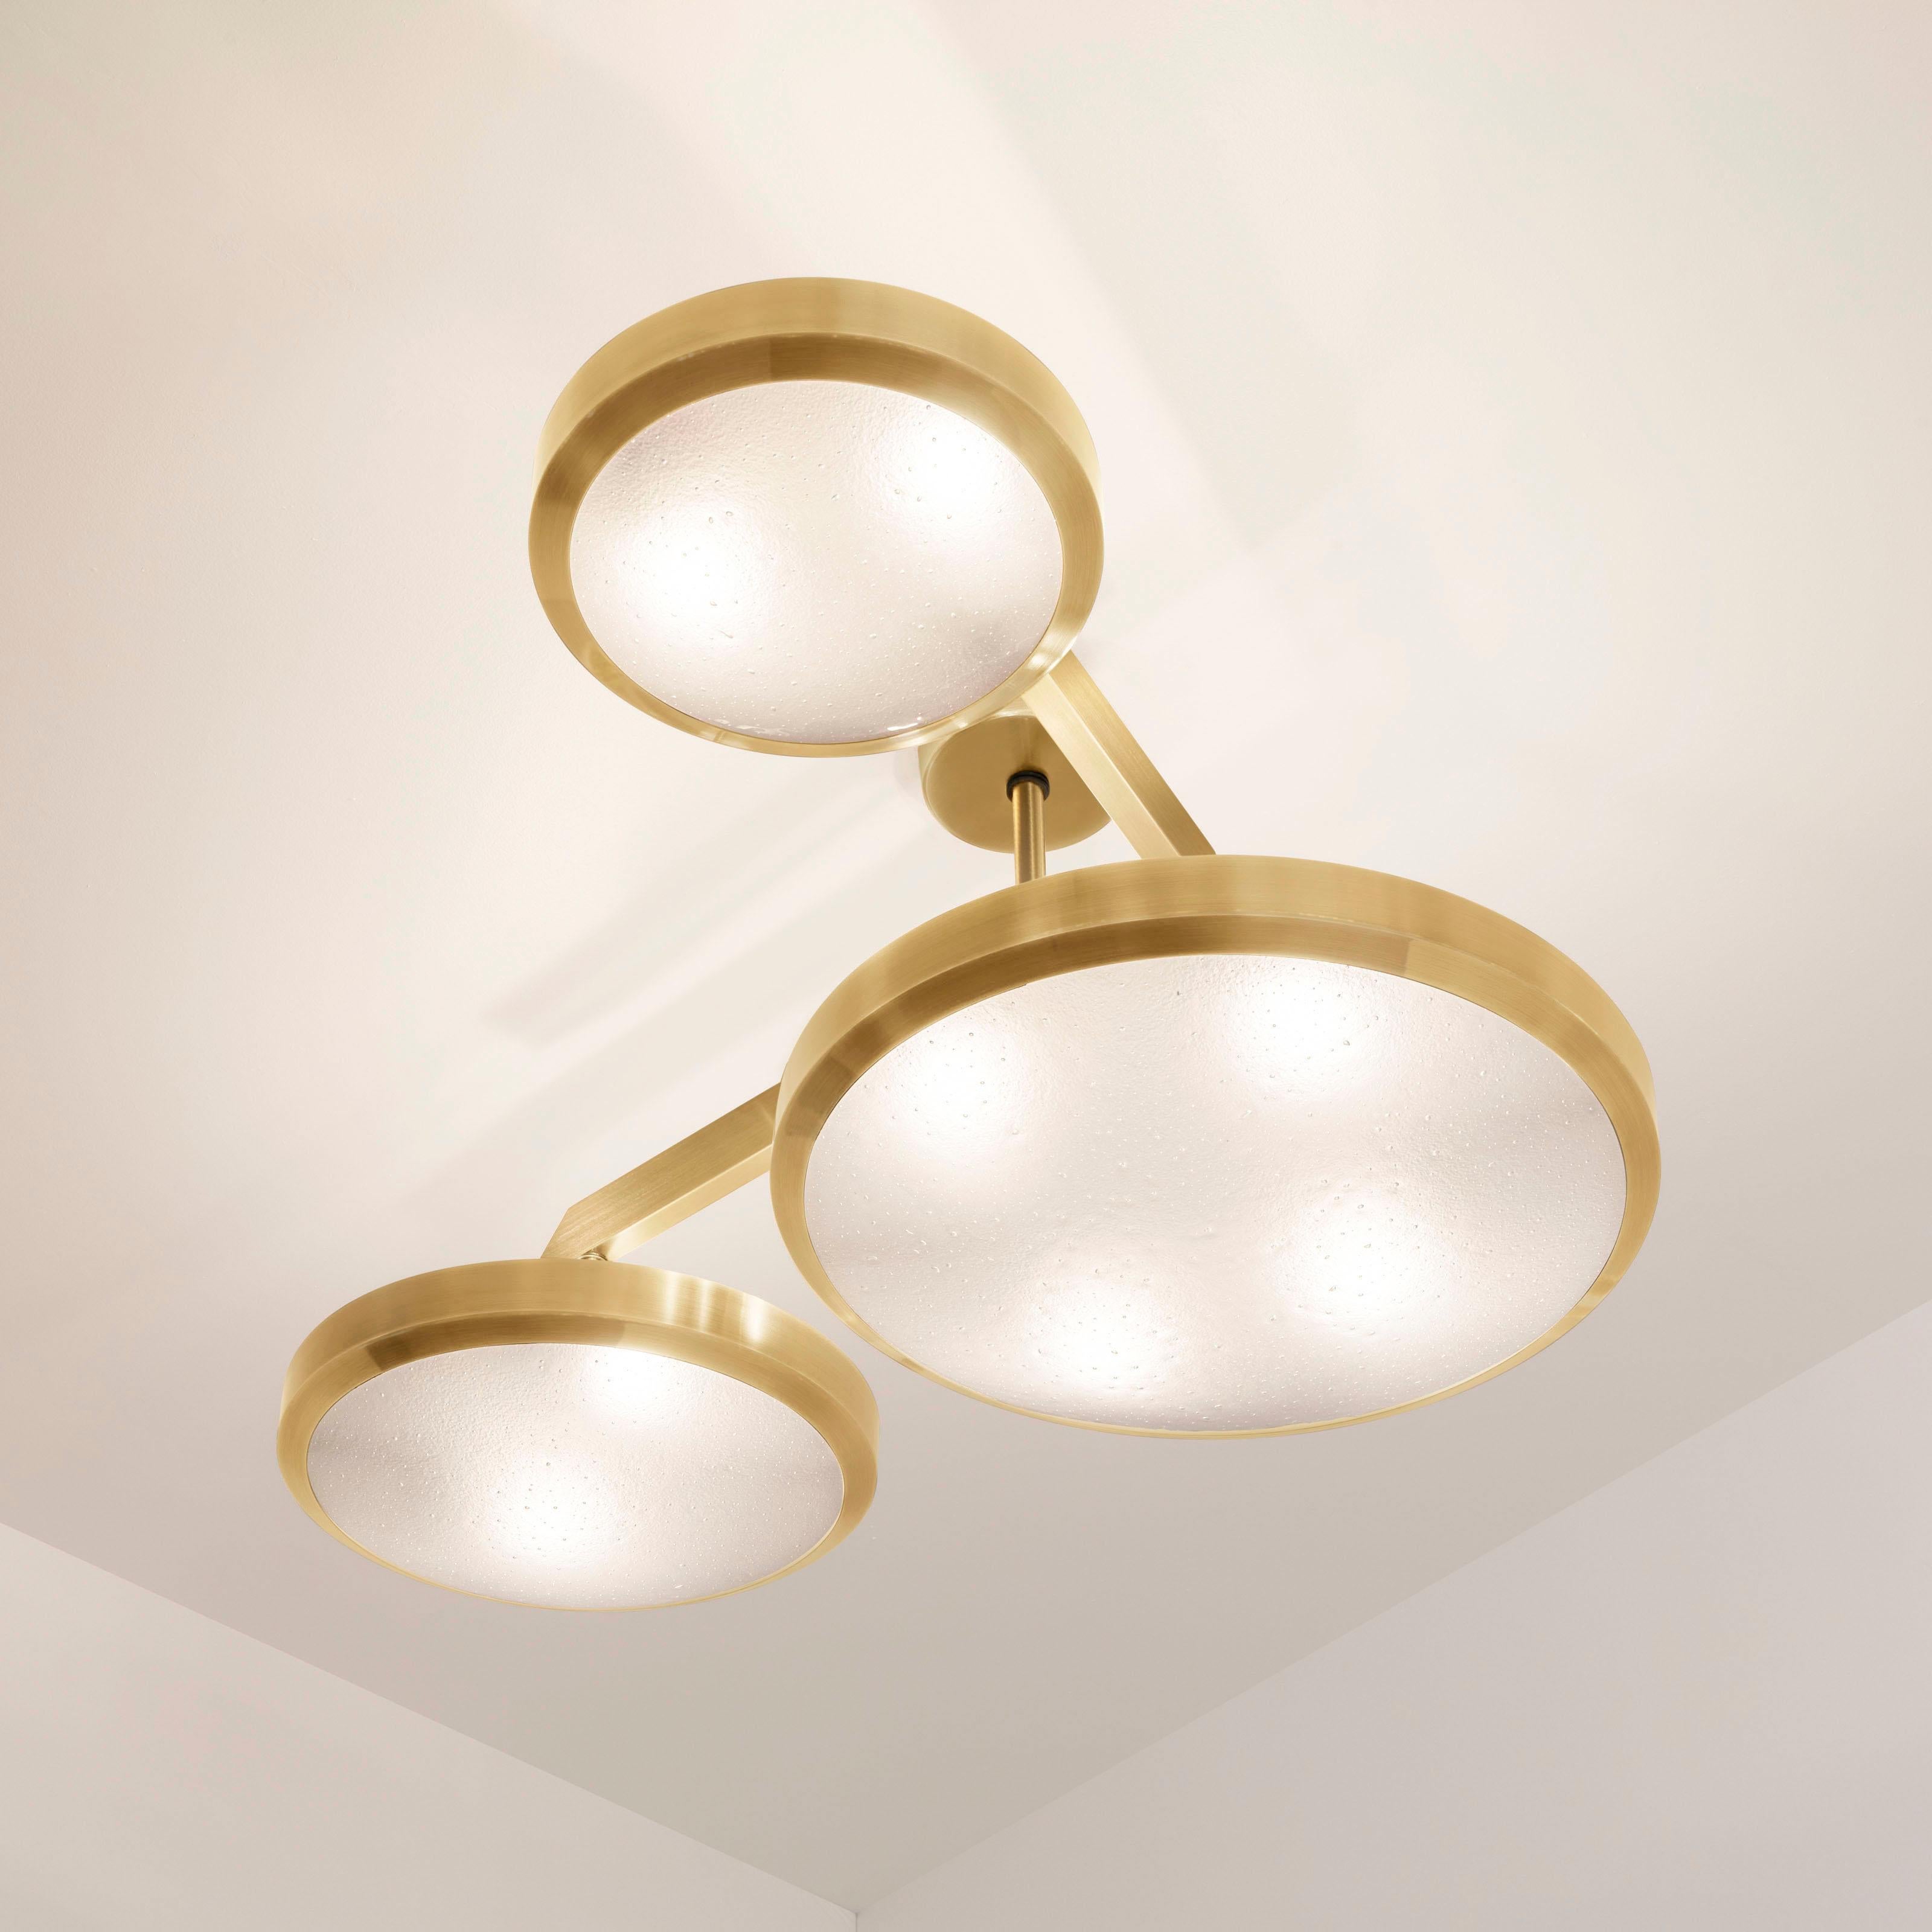 The Zeta ceiling light features a composition of variable sized Murano glass shades methodically balanced on a “V” shaped brass frame. The first images show the fixture in our satin brass finish-subsequent pictures show it in a selection of